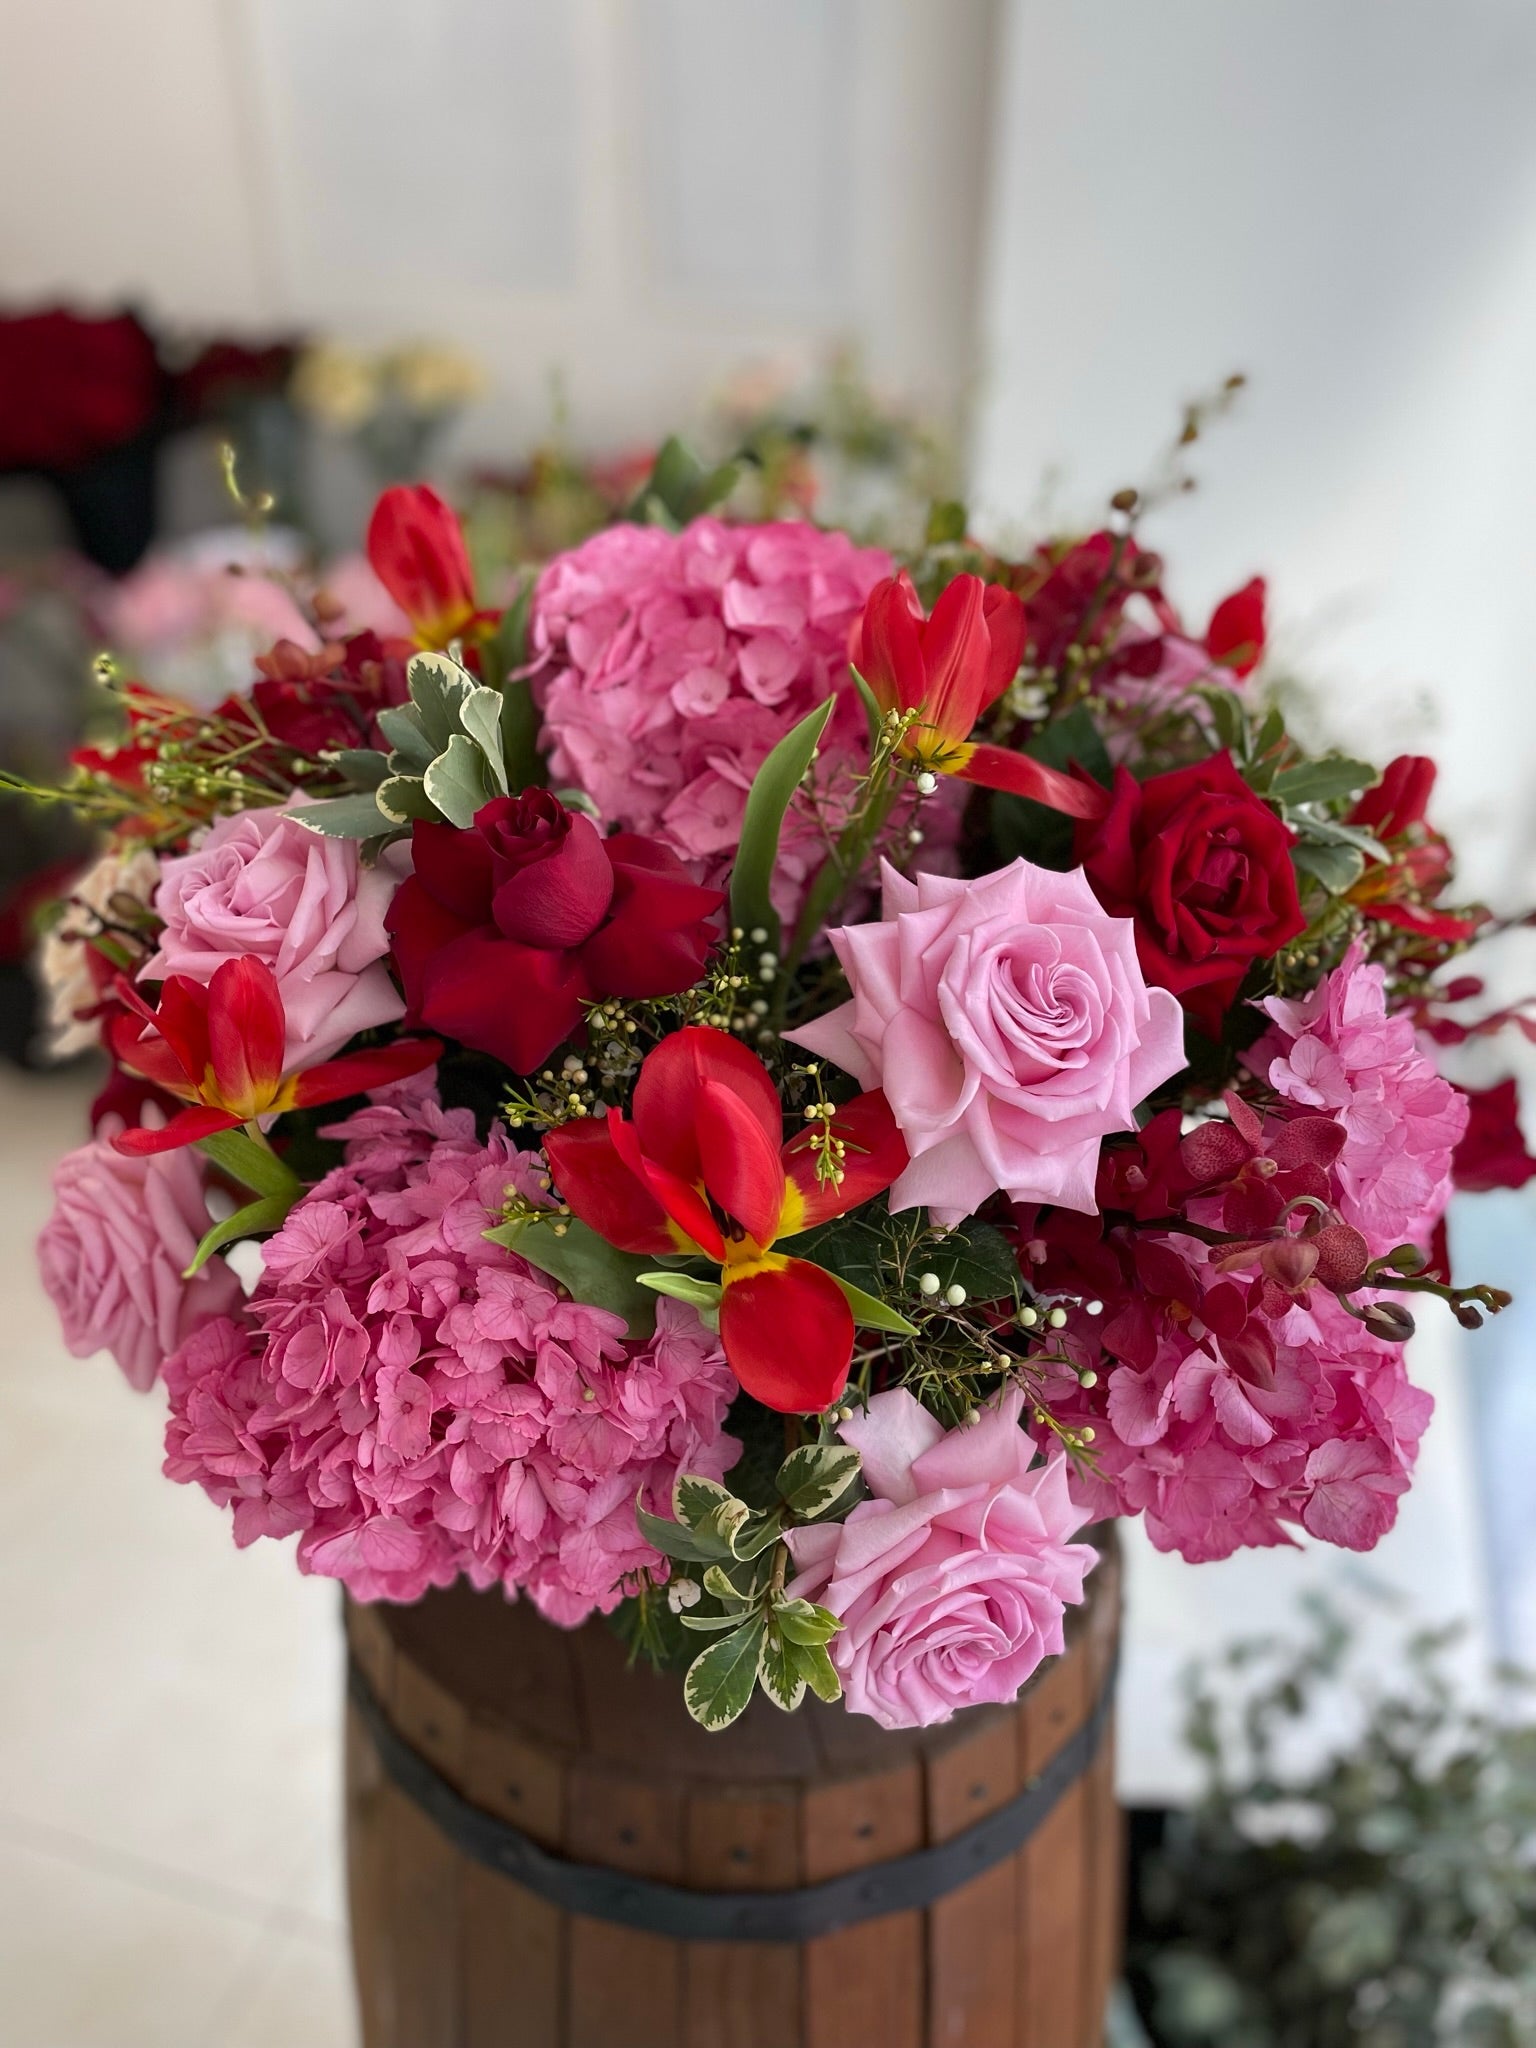 Mixed red and pink flowers